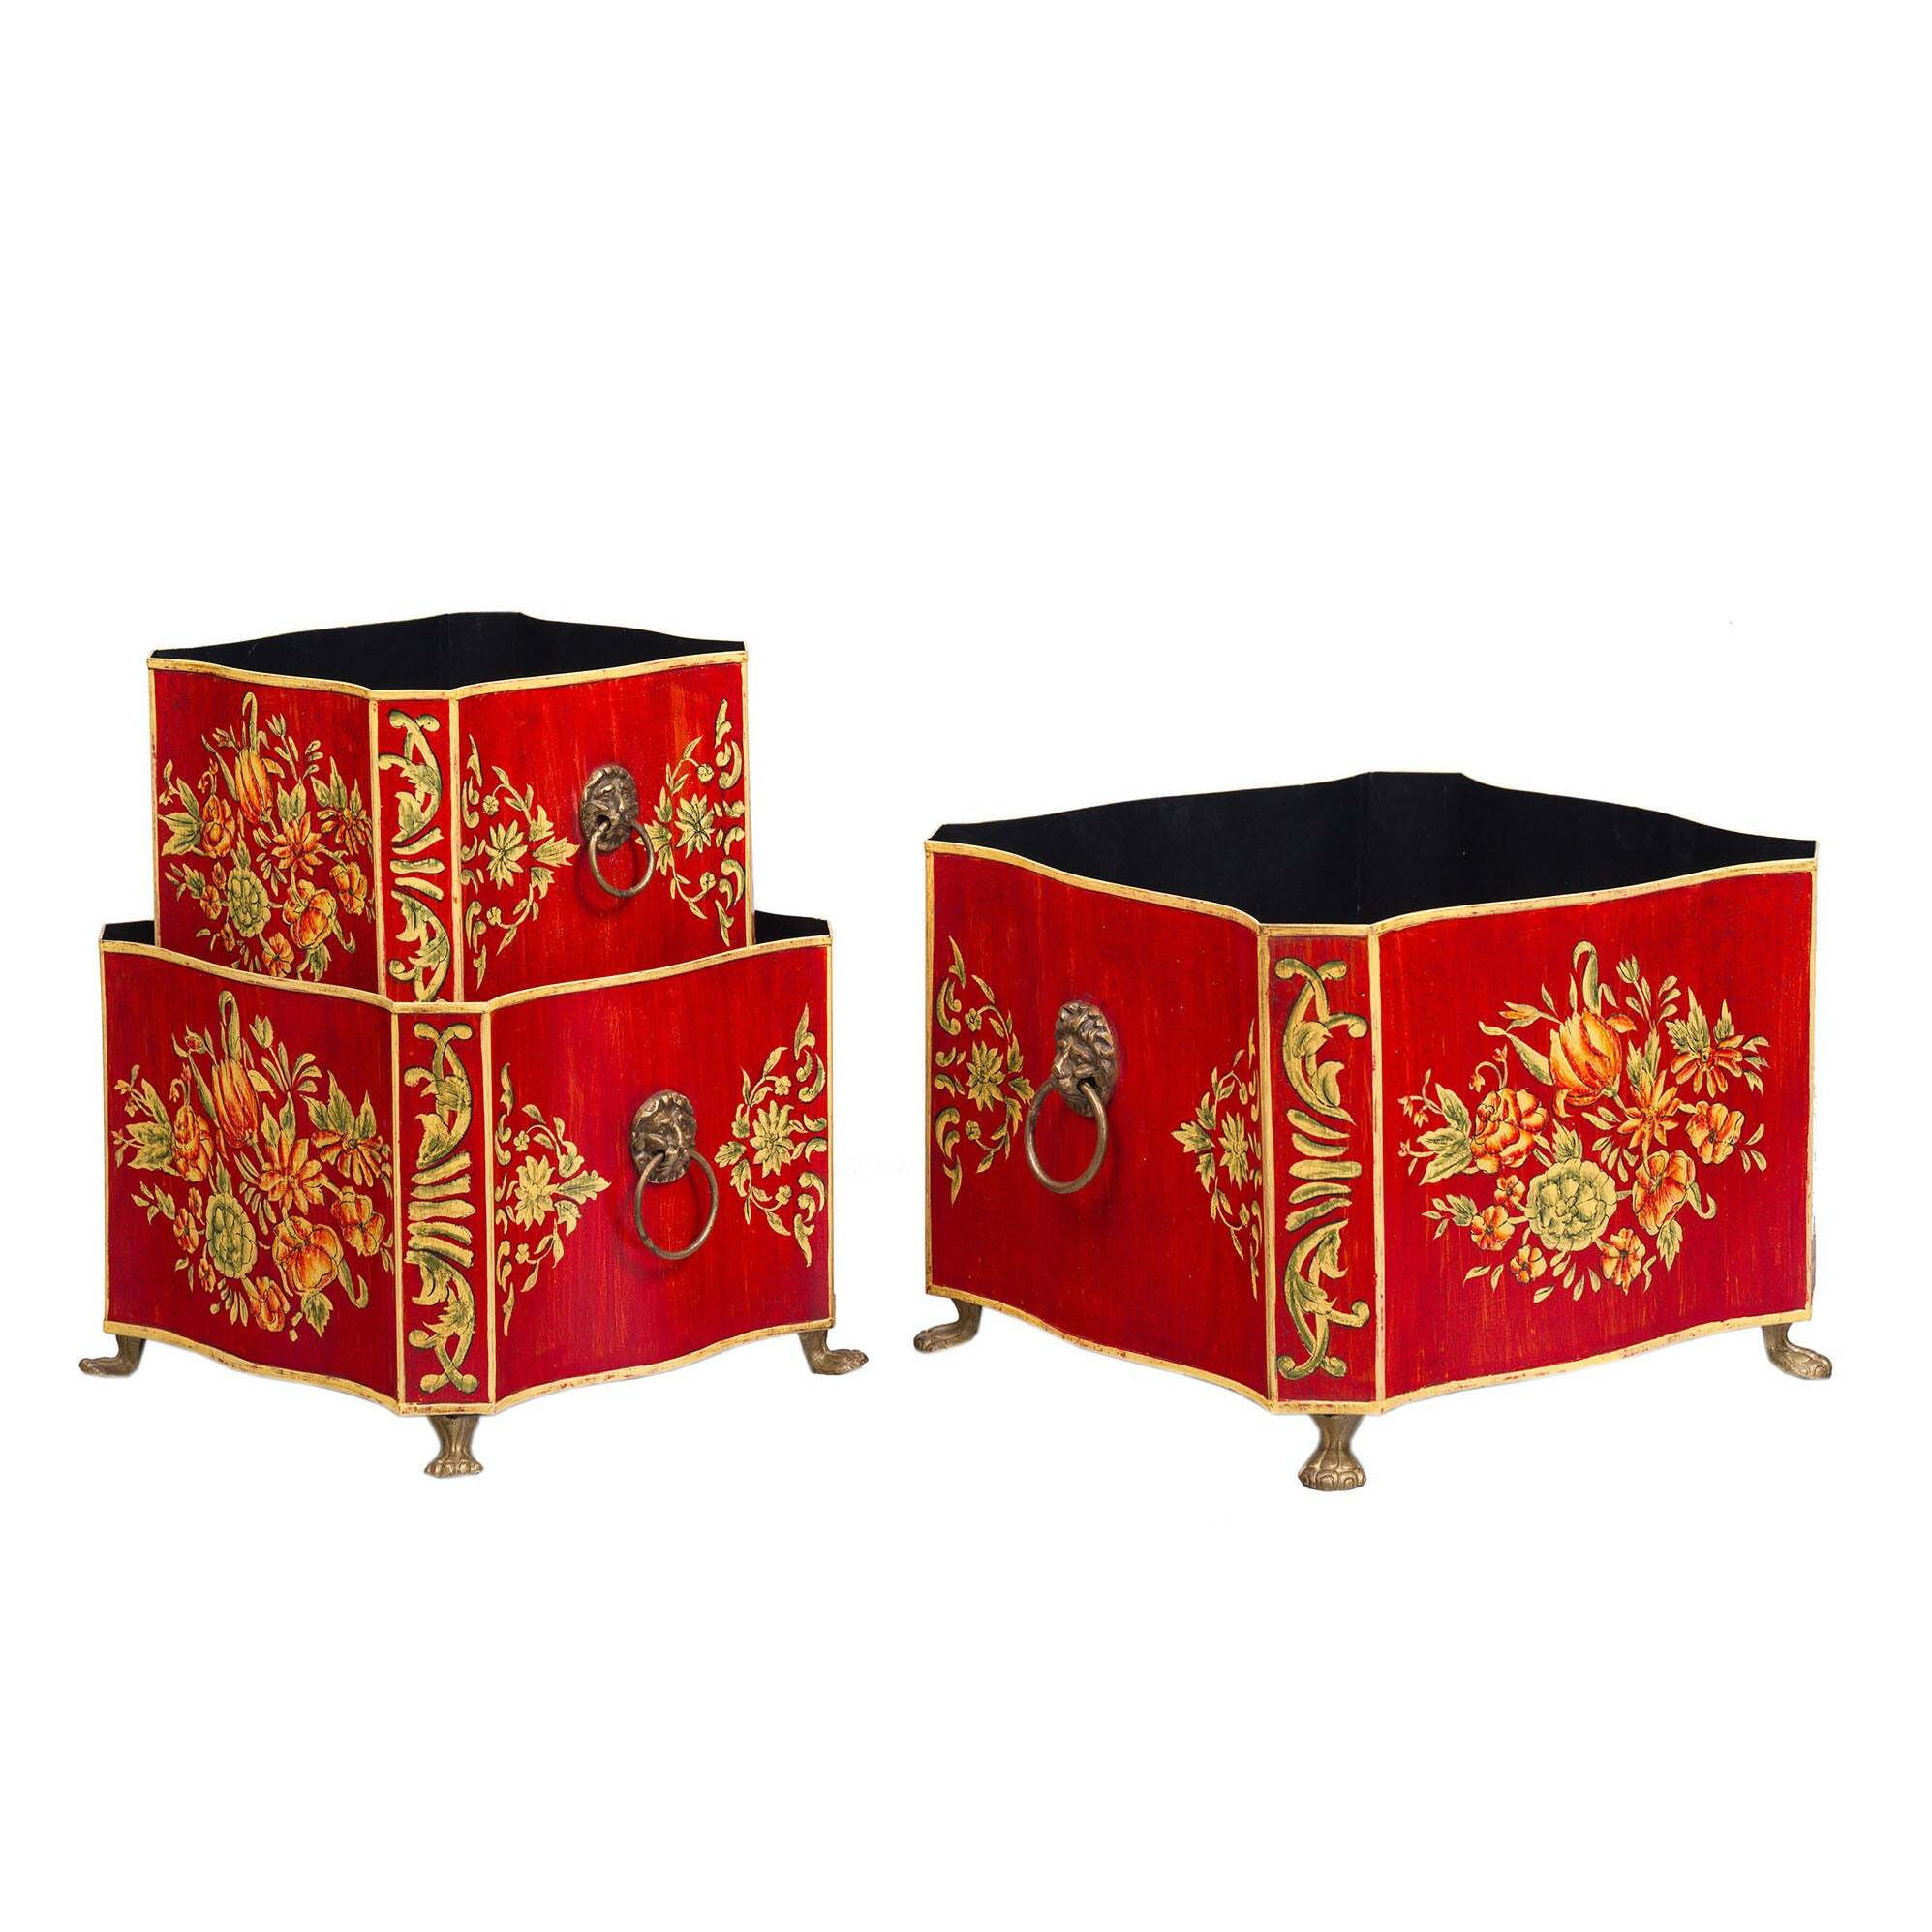 Red Floral Design Nest of 3 Boxes - image 1